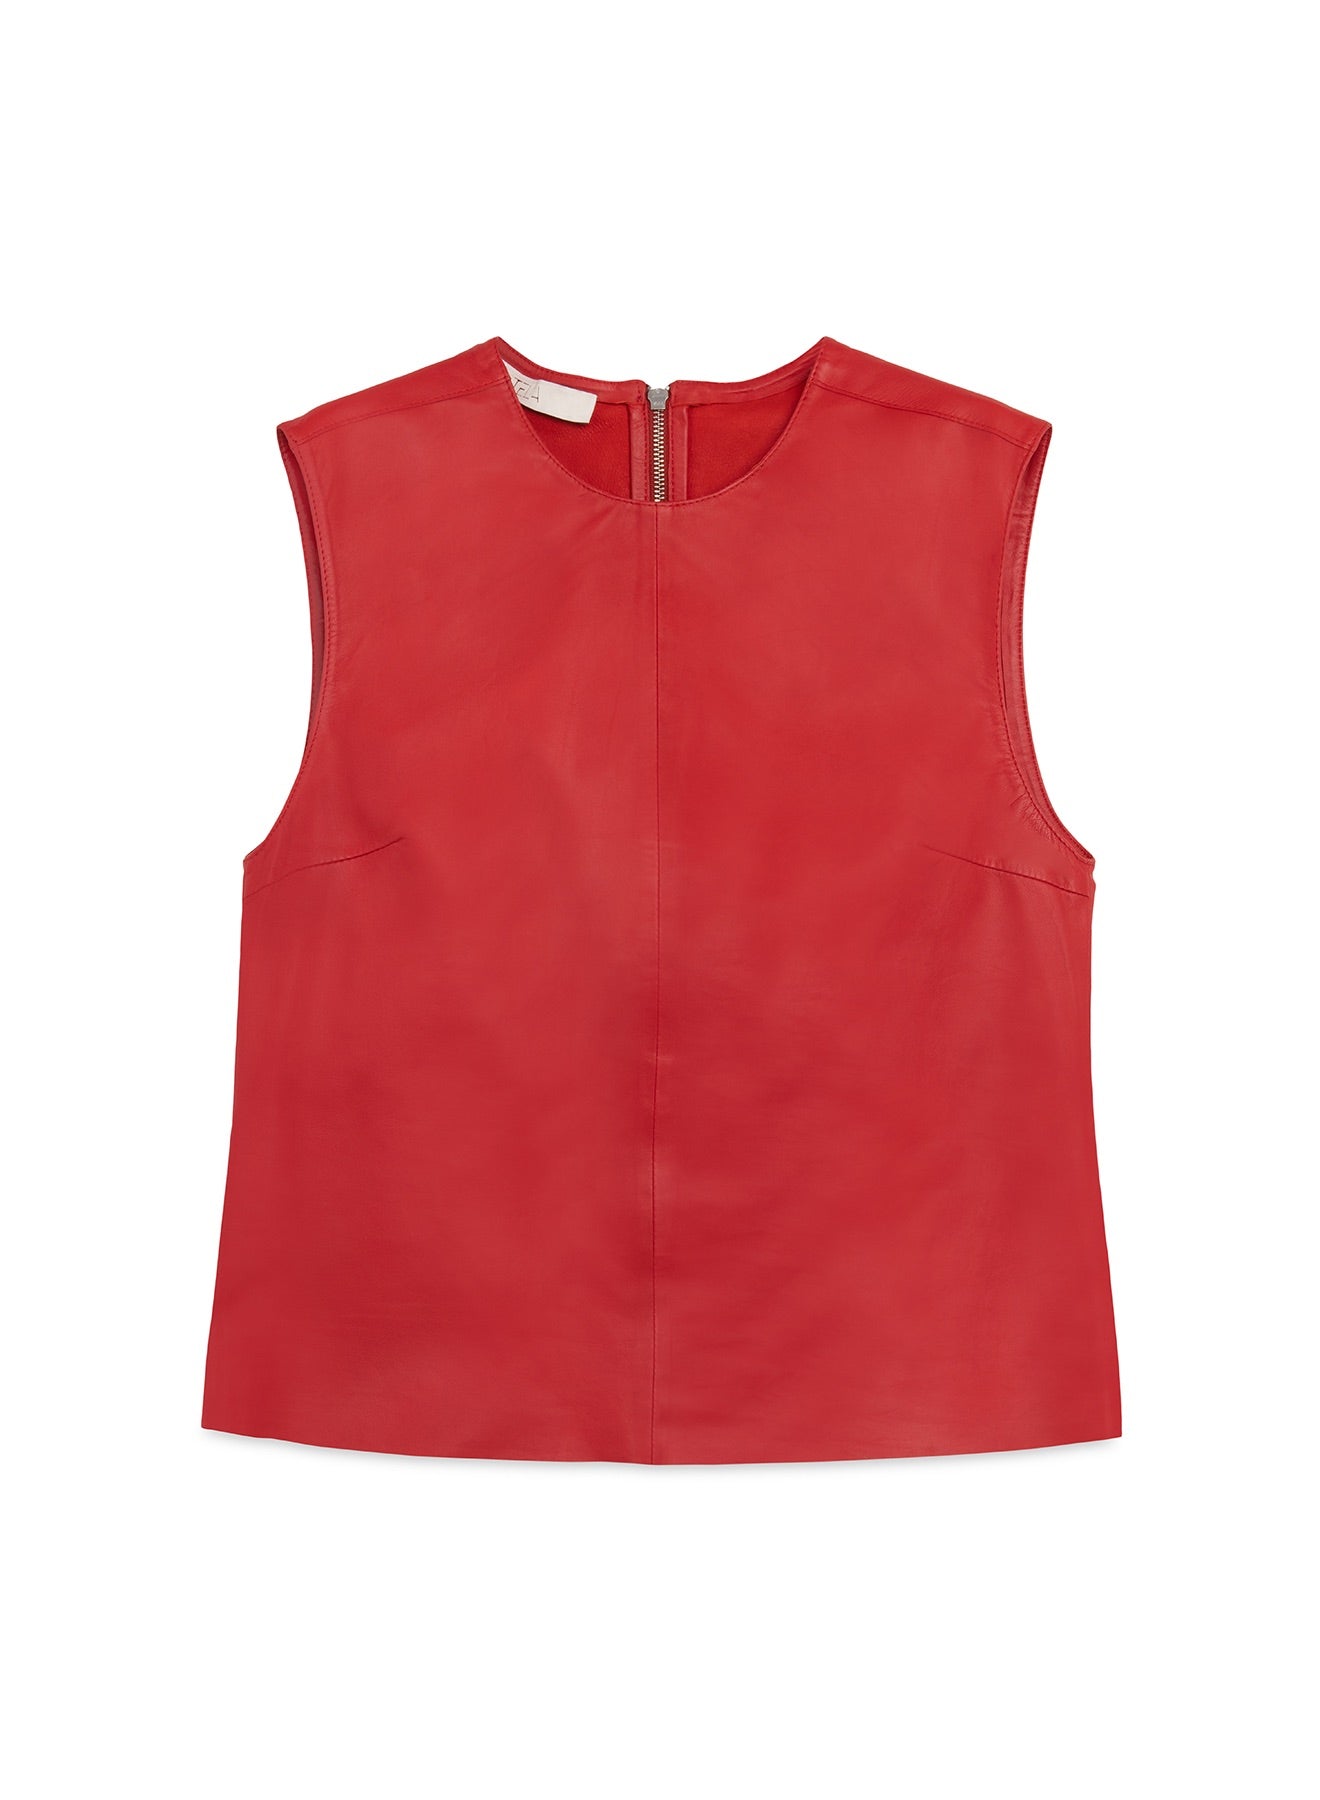 Red Leather Sleeveless Top